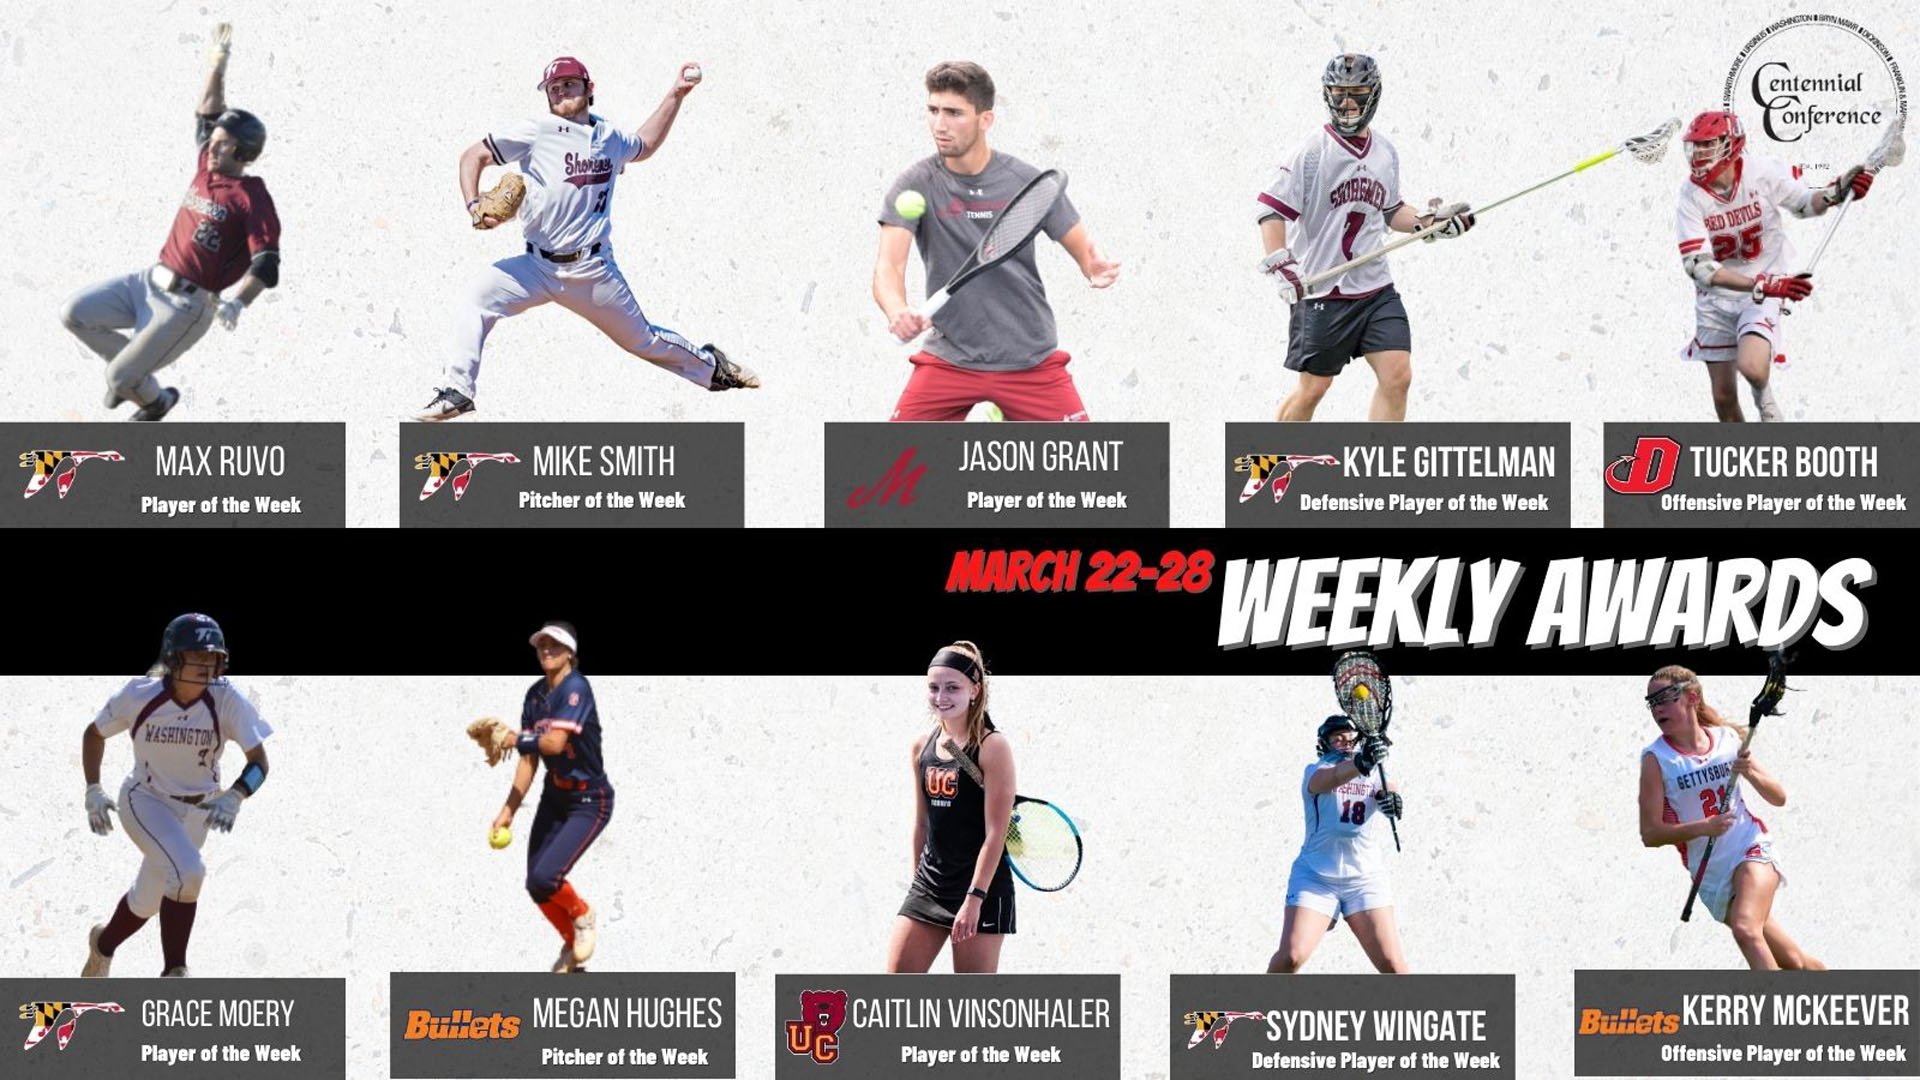 Centennial Conference Athletes of the Week - March 22-28